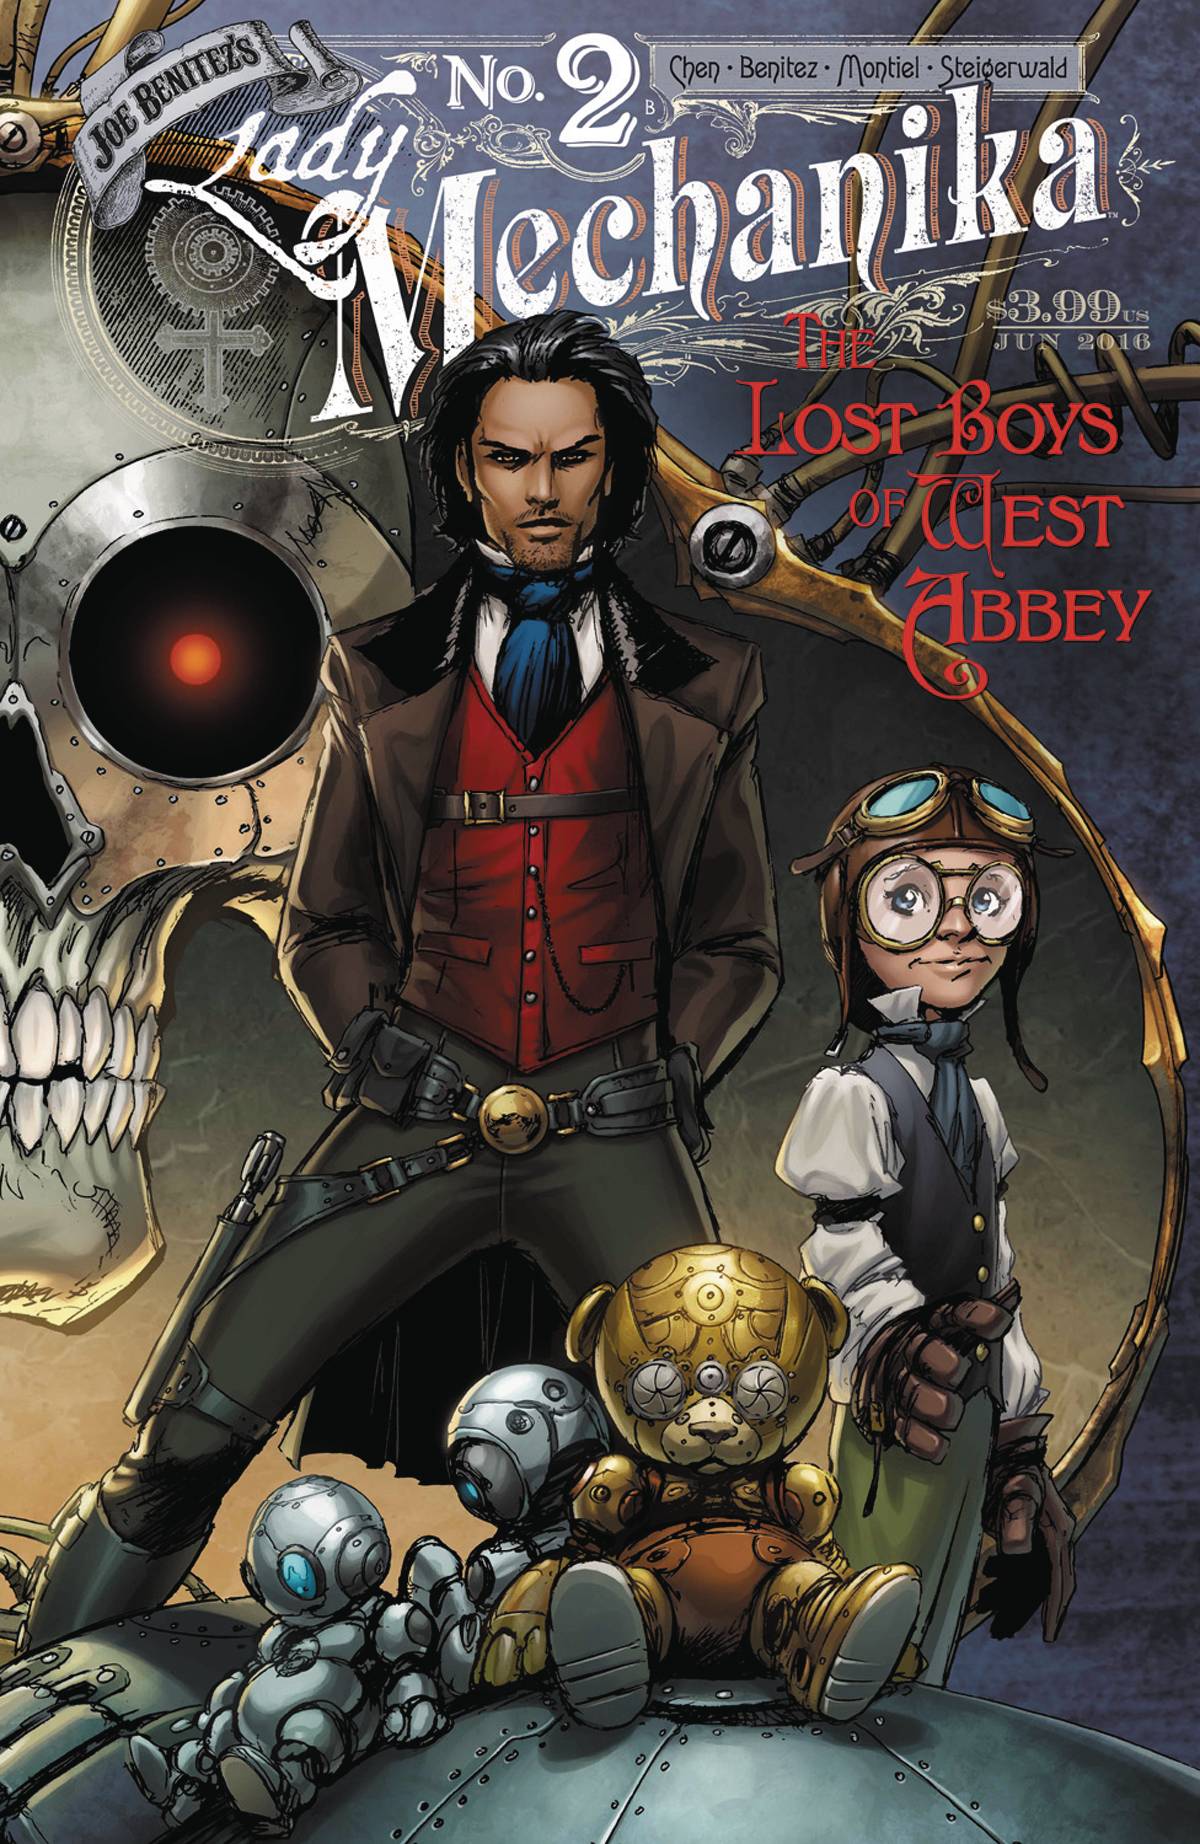 Lady Mechanika Lost Boys of West Abbey #2 10 Cpy Incentive